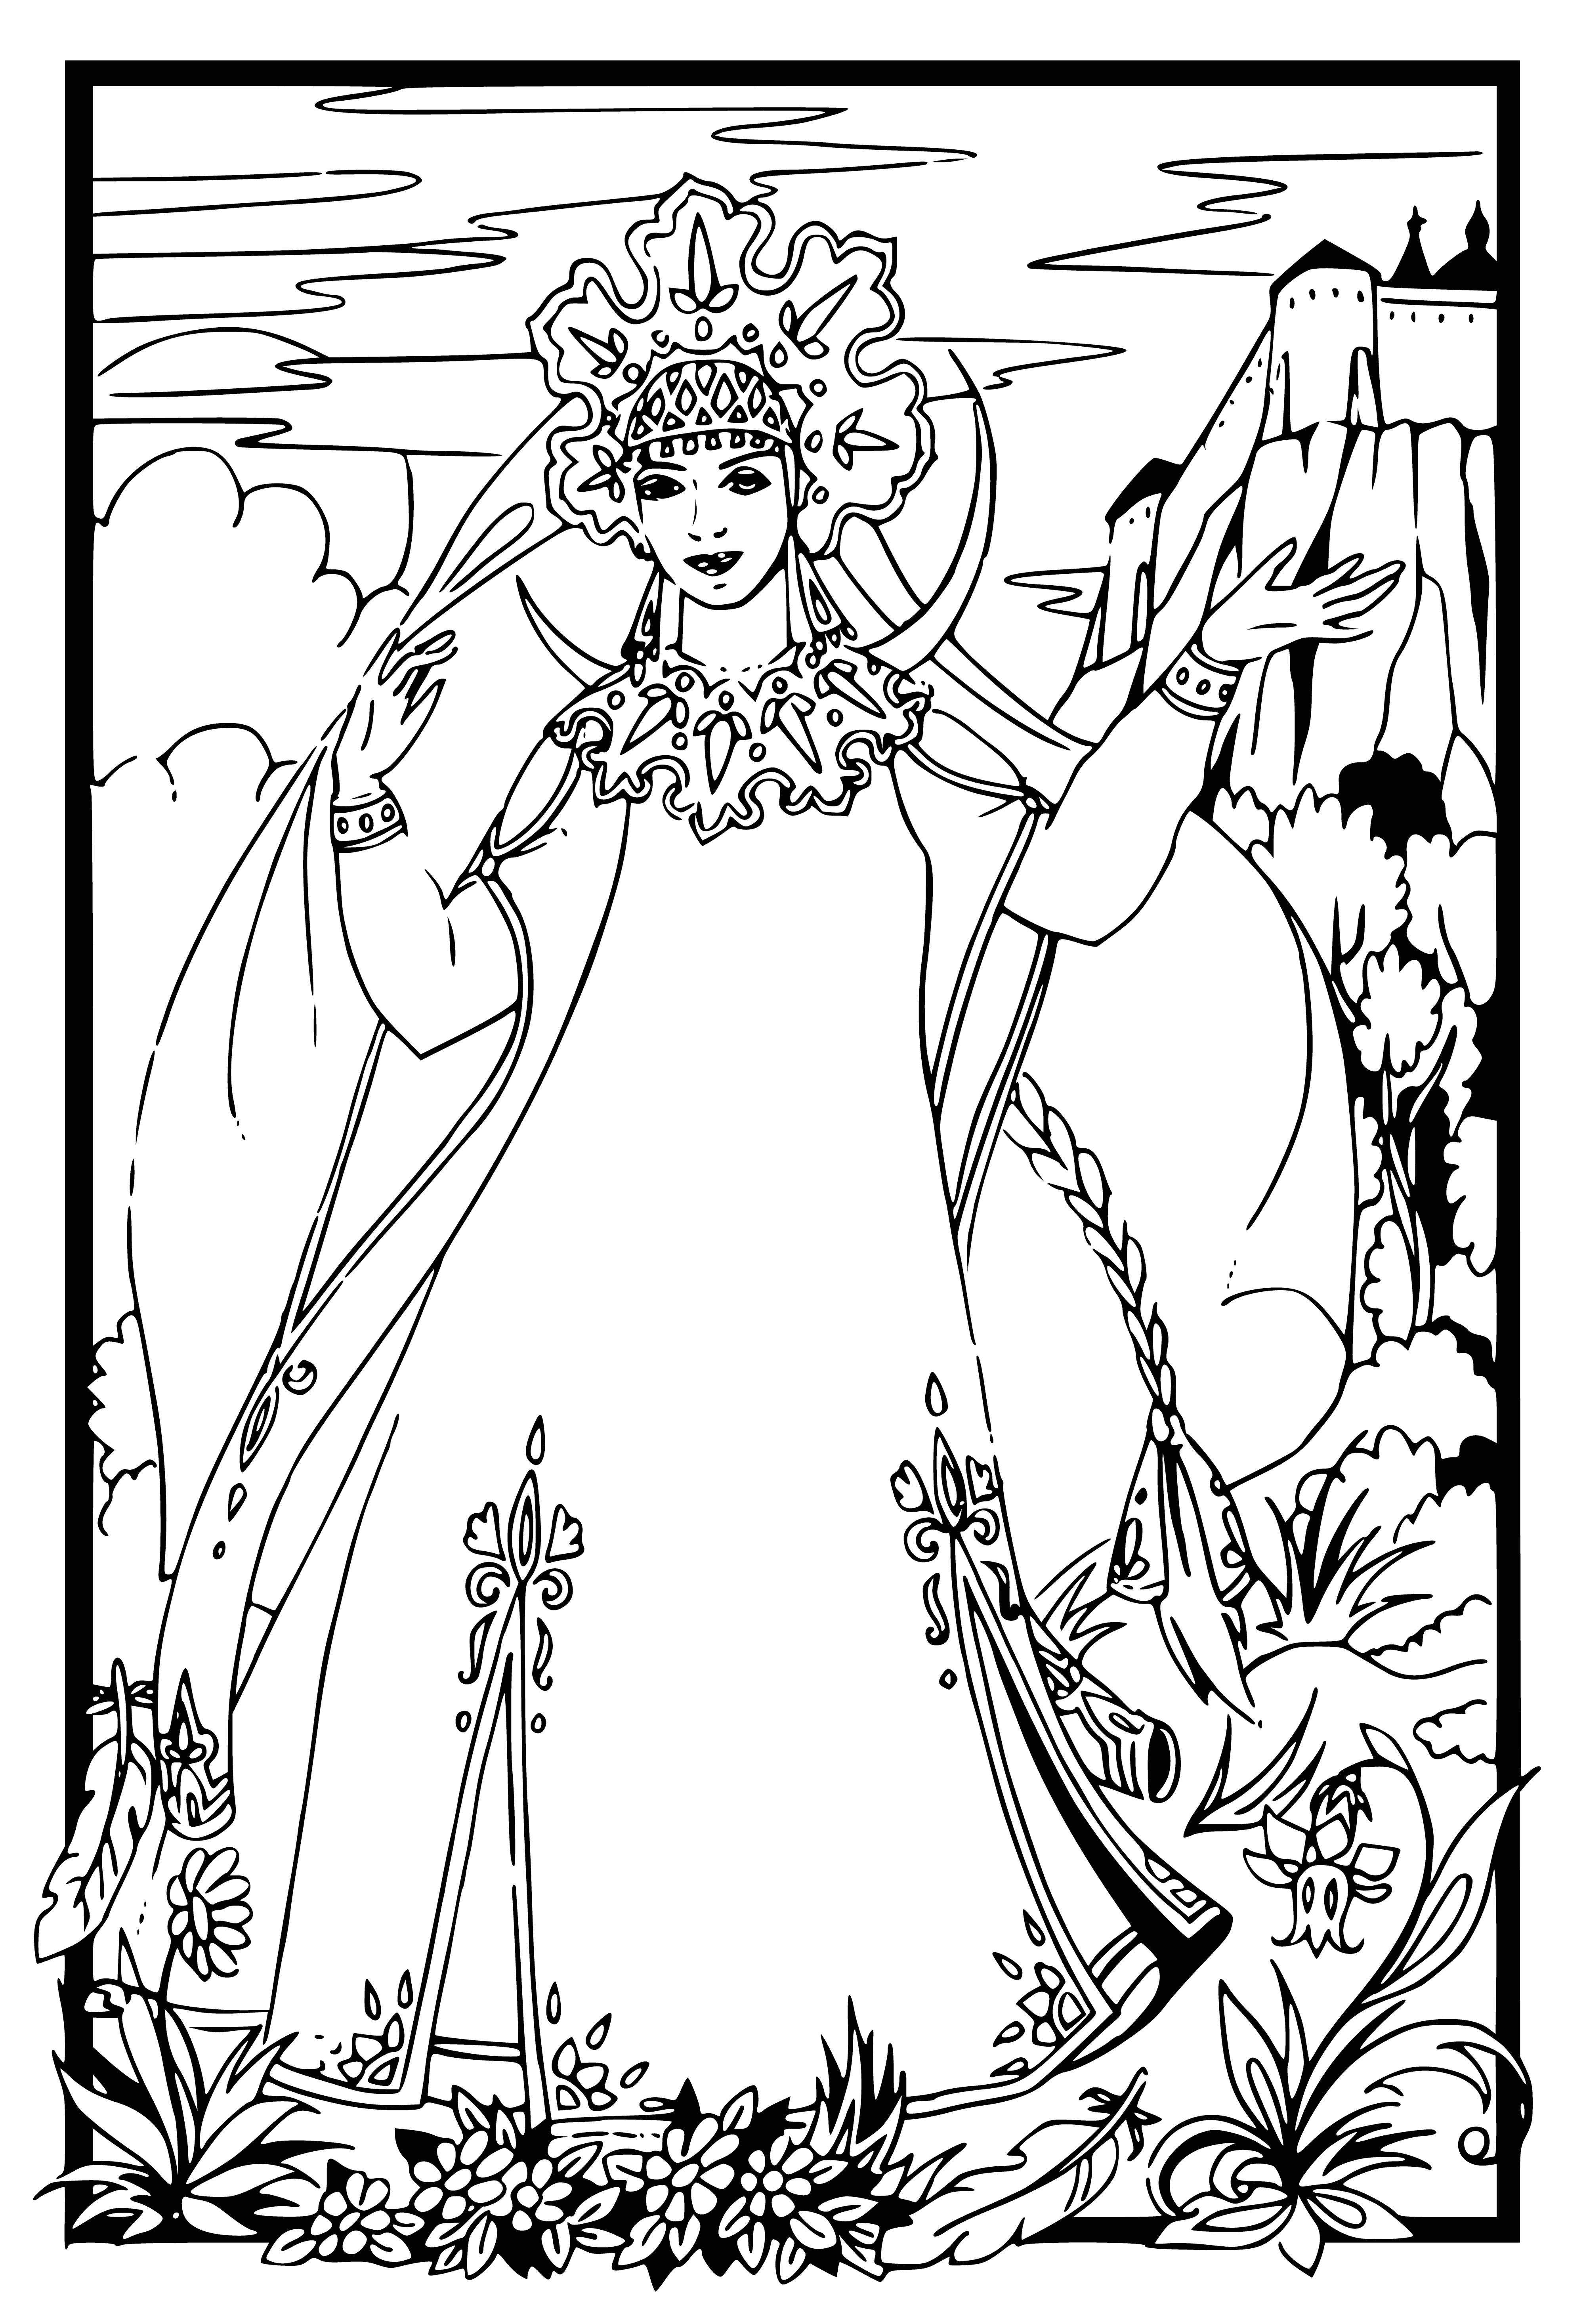 coloring page: Young woman in white dress with blue scarf, blonde hair, blue eyes on riverbank with swan.